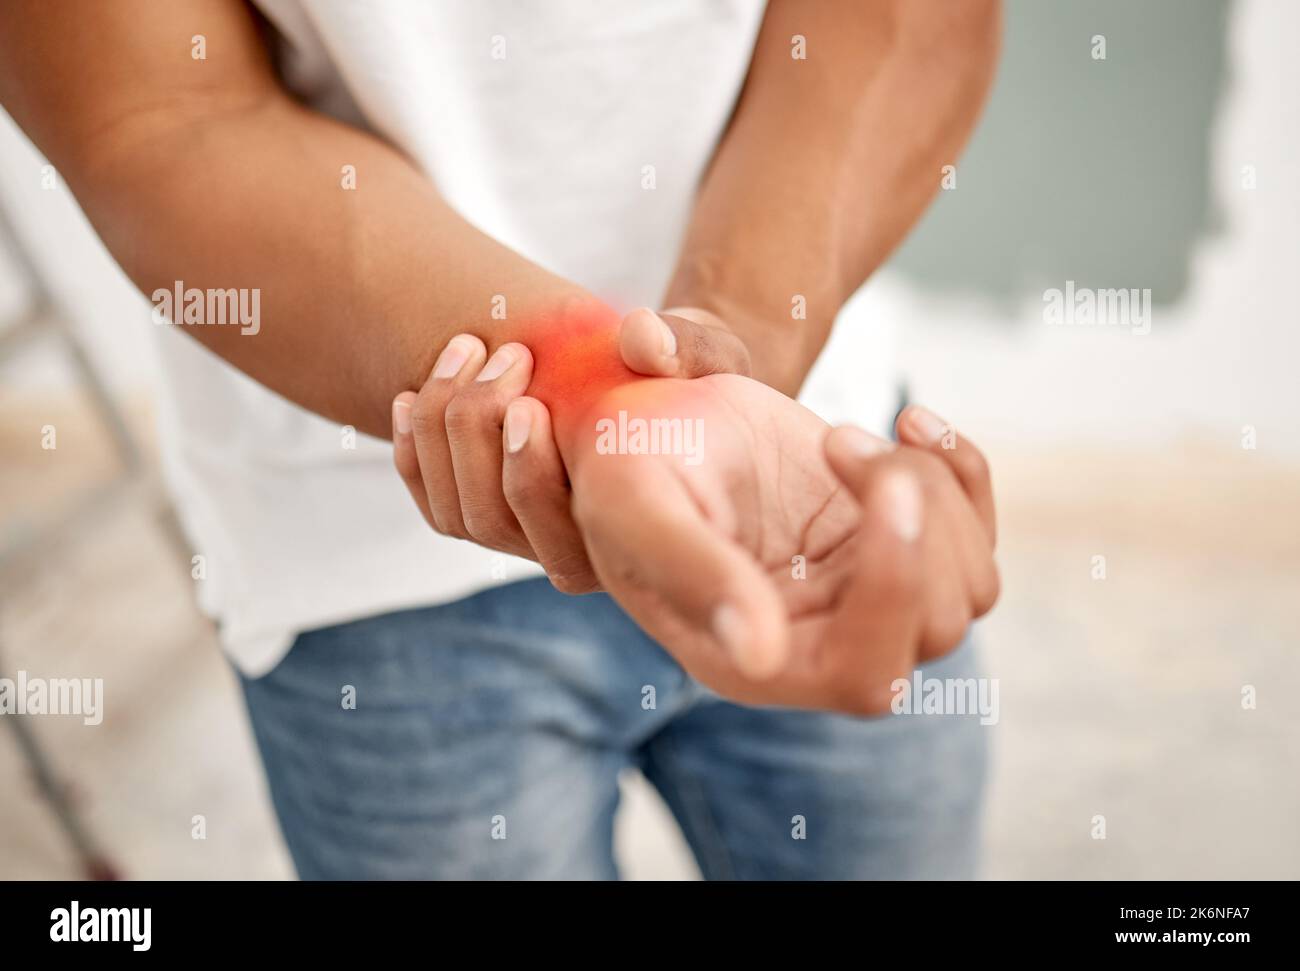 This where I feel the pain. an unrecognizable man experiencing discomfort in his wrist. Stock Photo